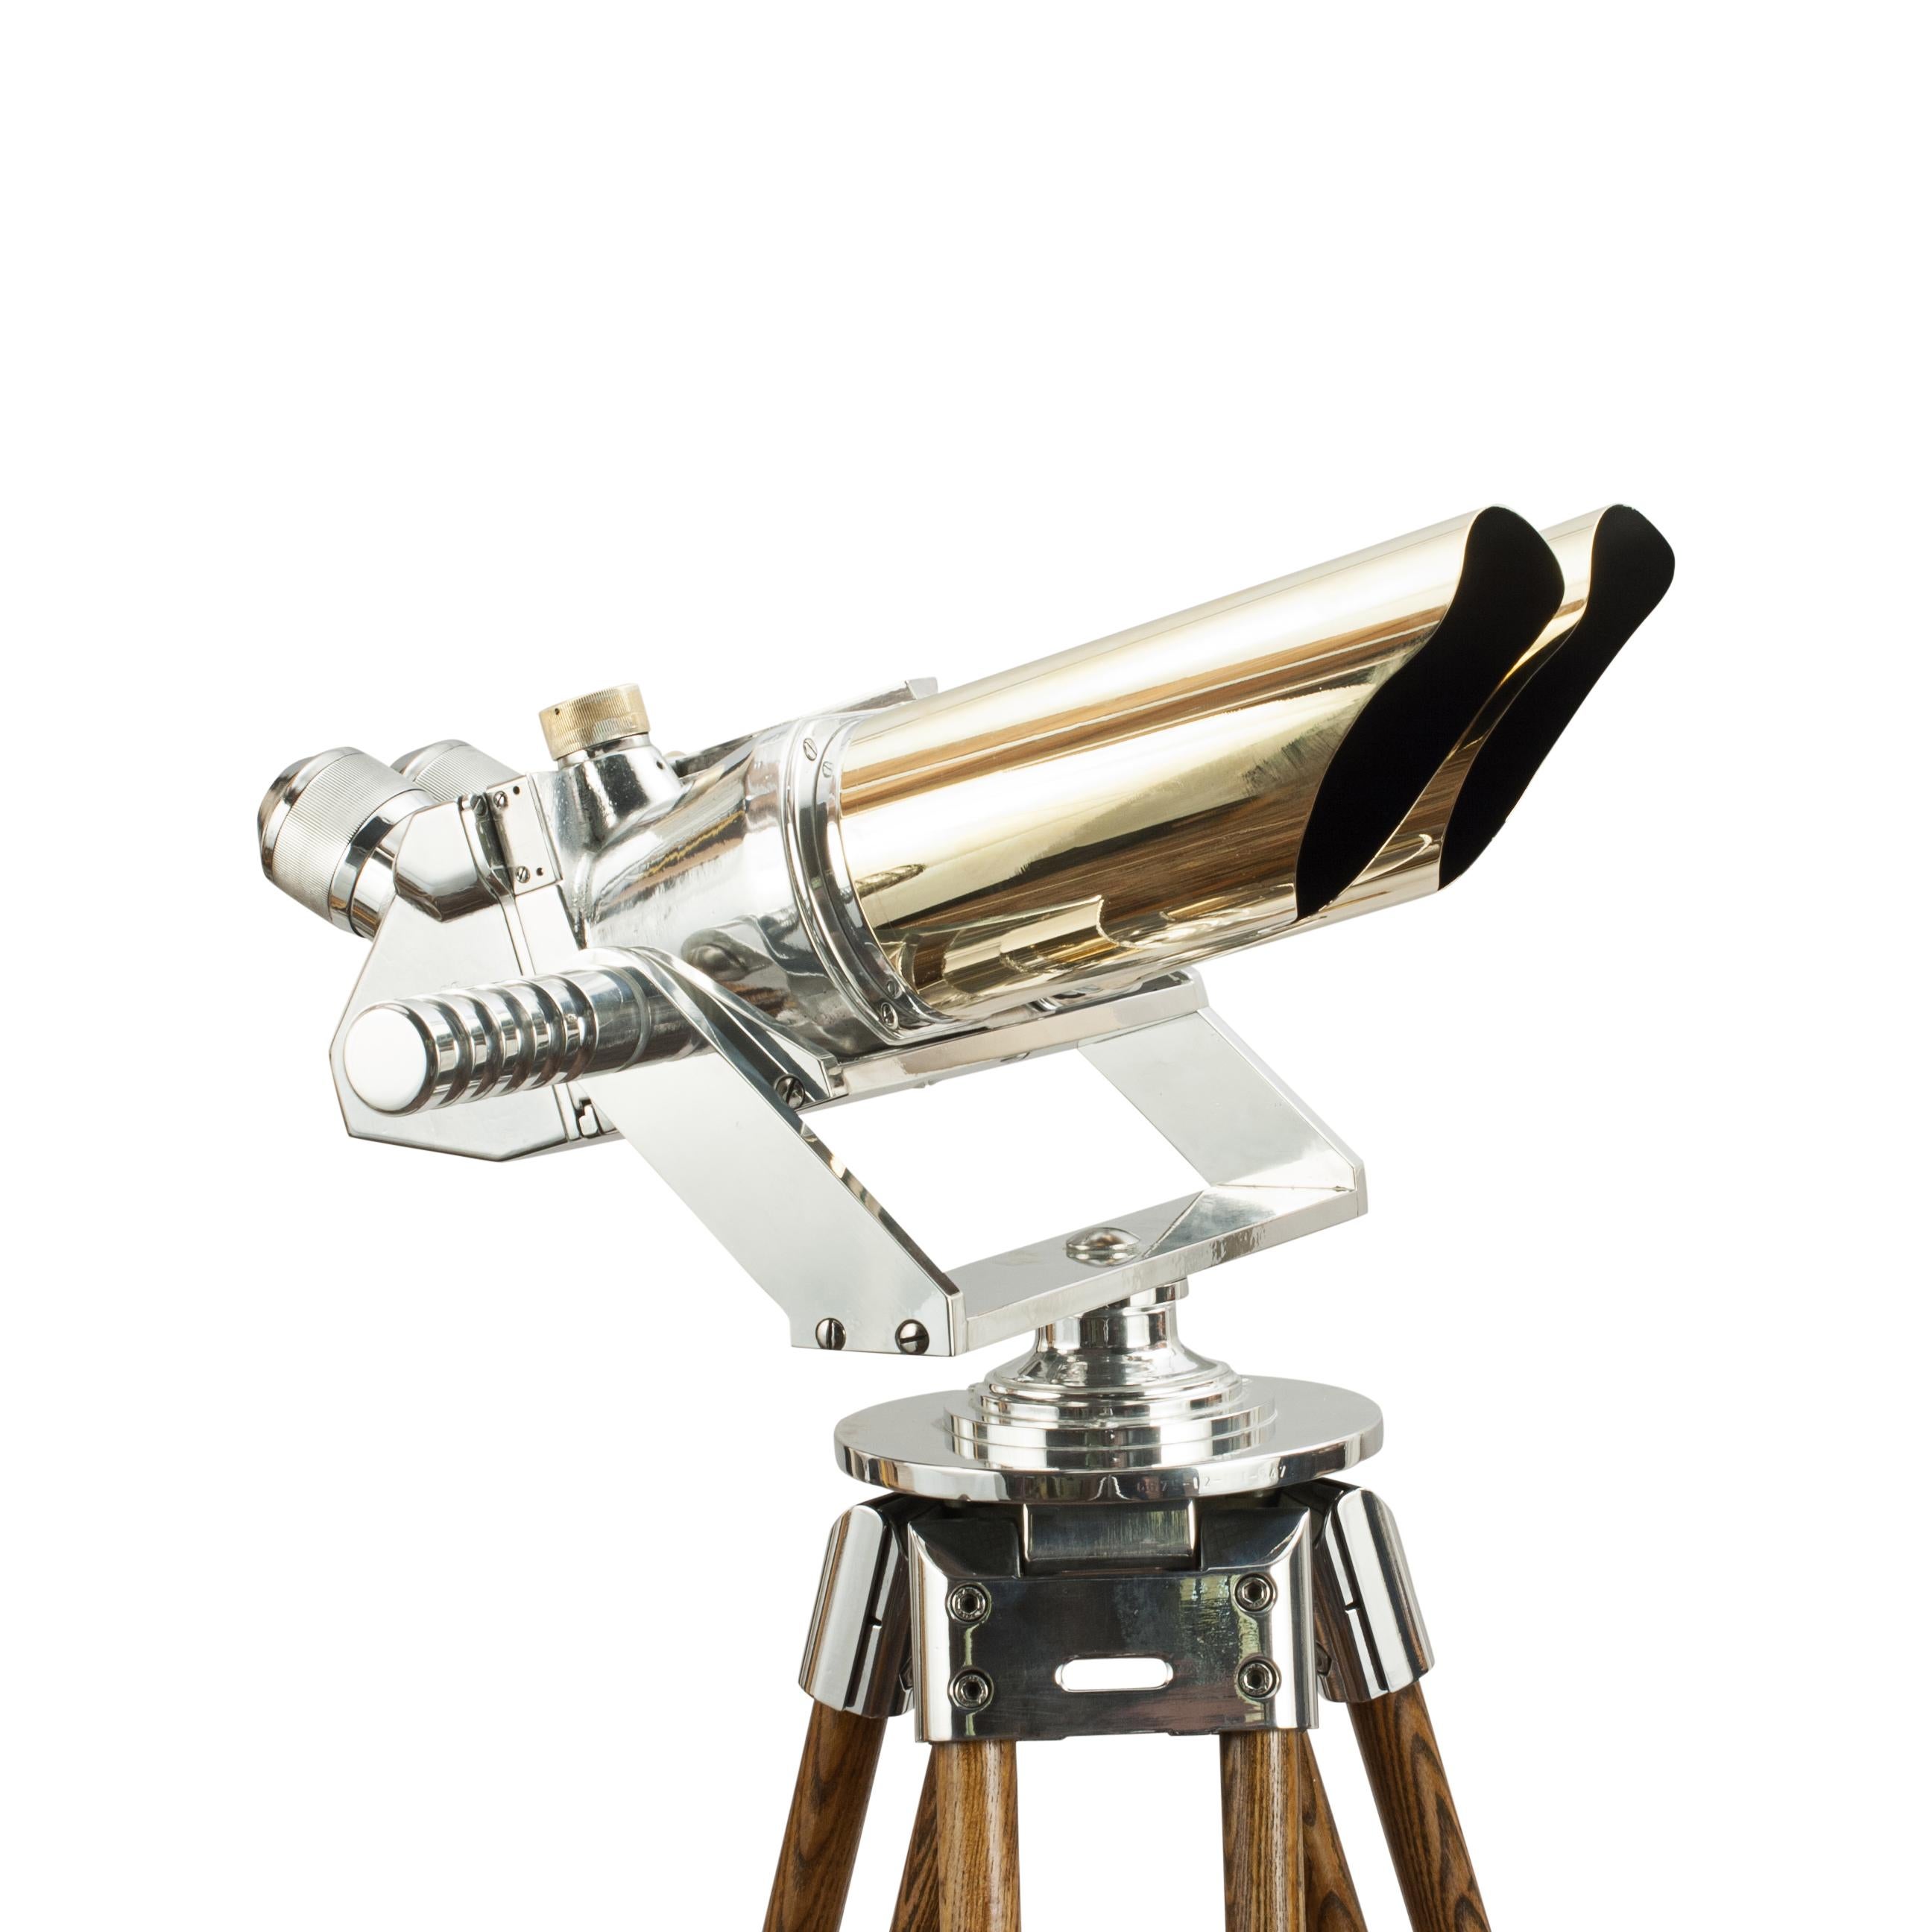 German Schneider Observation Binoculars, 10 X 80.
A pair of German ex-military observation binoculars mounted on a modern aluminium cradle and gimble with adjustable wooden tripod. The binoculars with 45º incline eyepieces and are marked D.F. 10 x